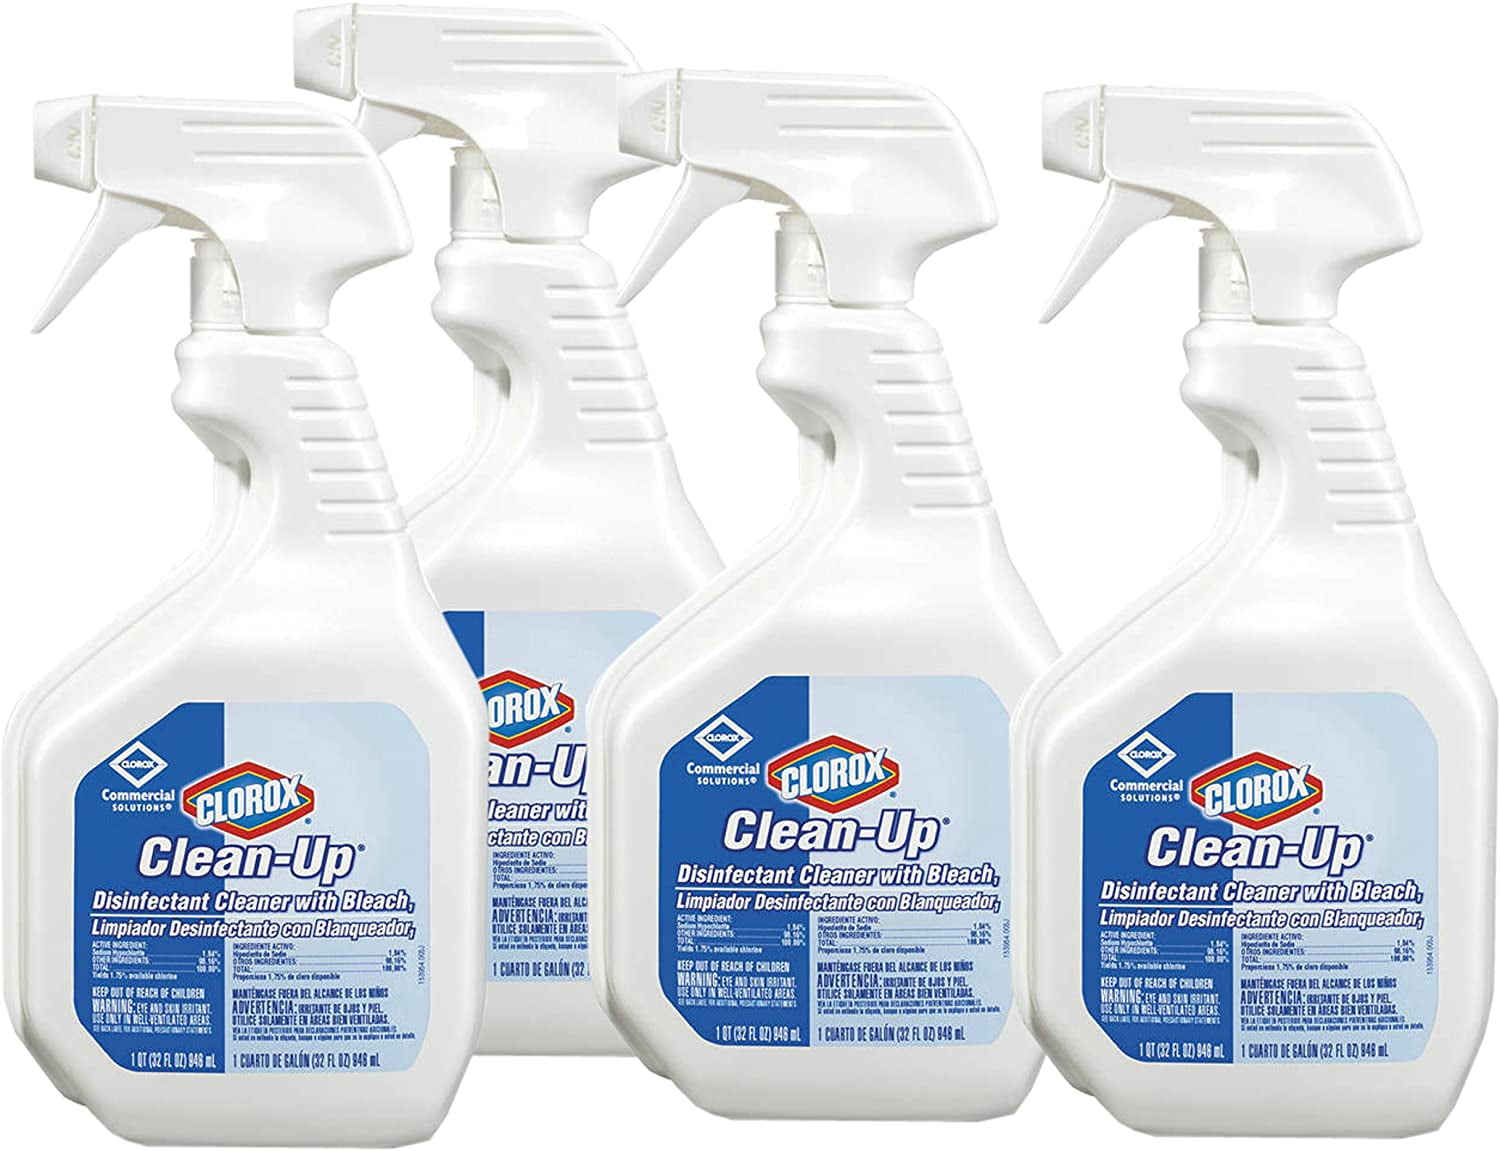 Clorox Clean-Up; Disinfectant Cleaner with Bleach, 32oz Spray